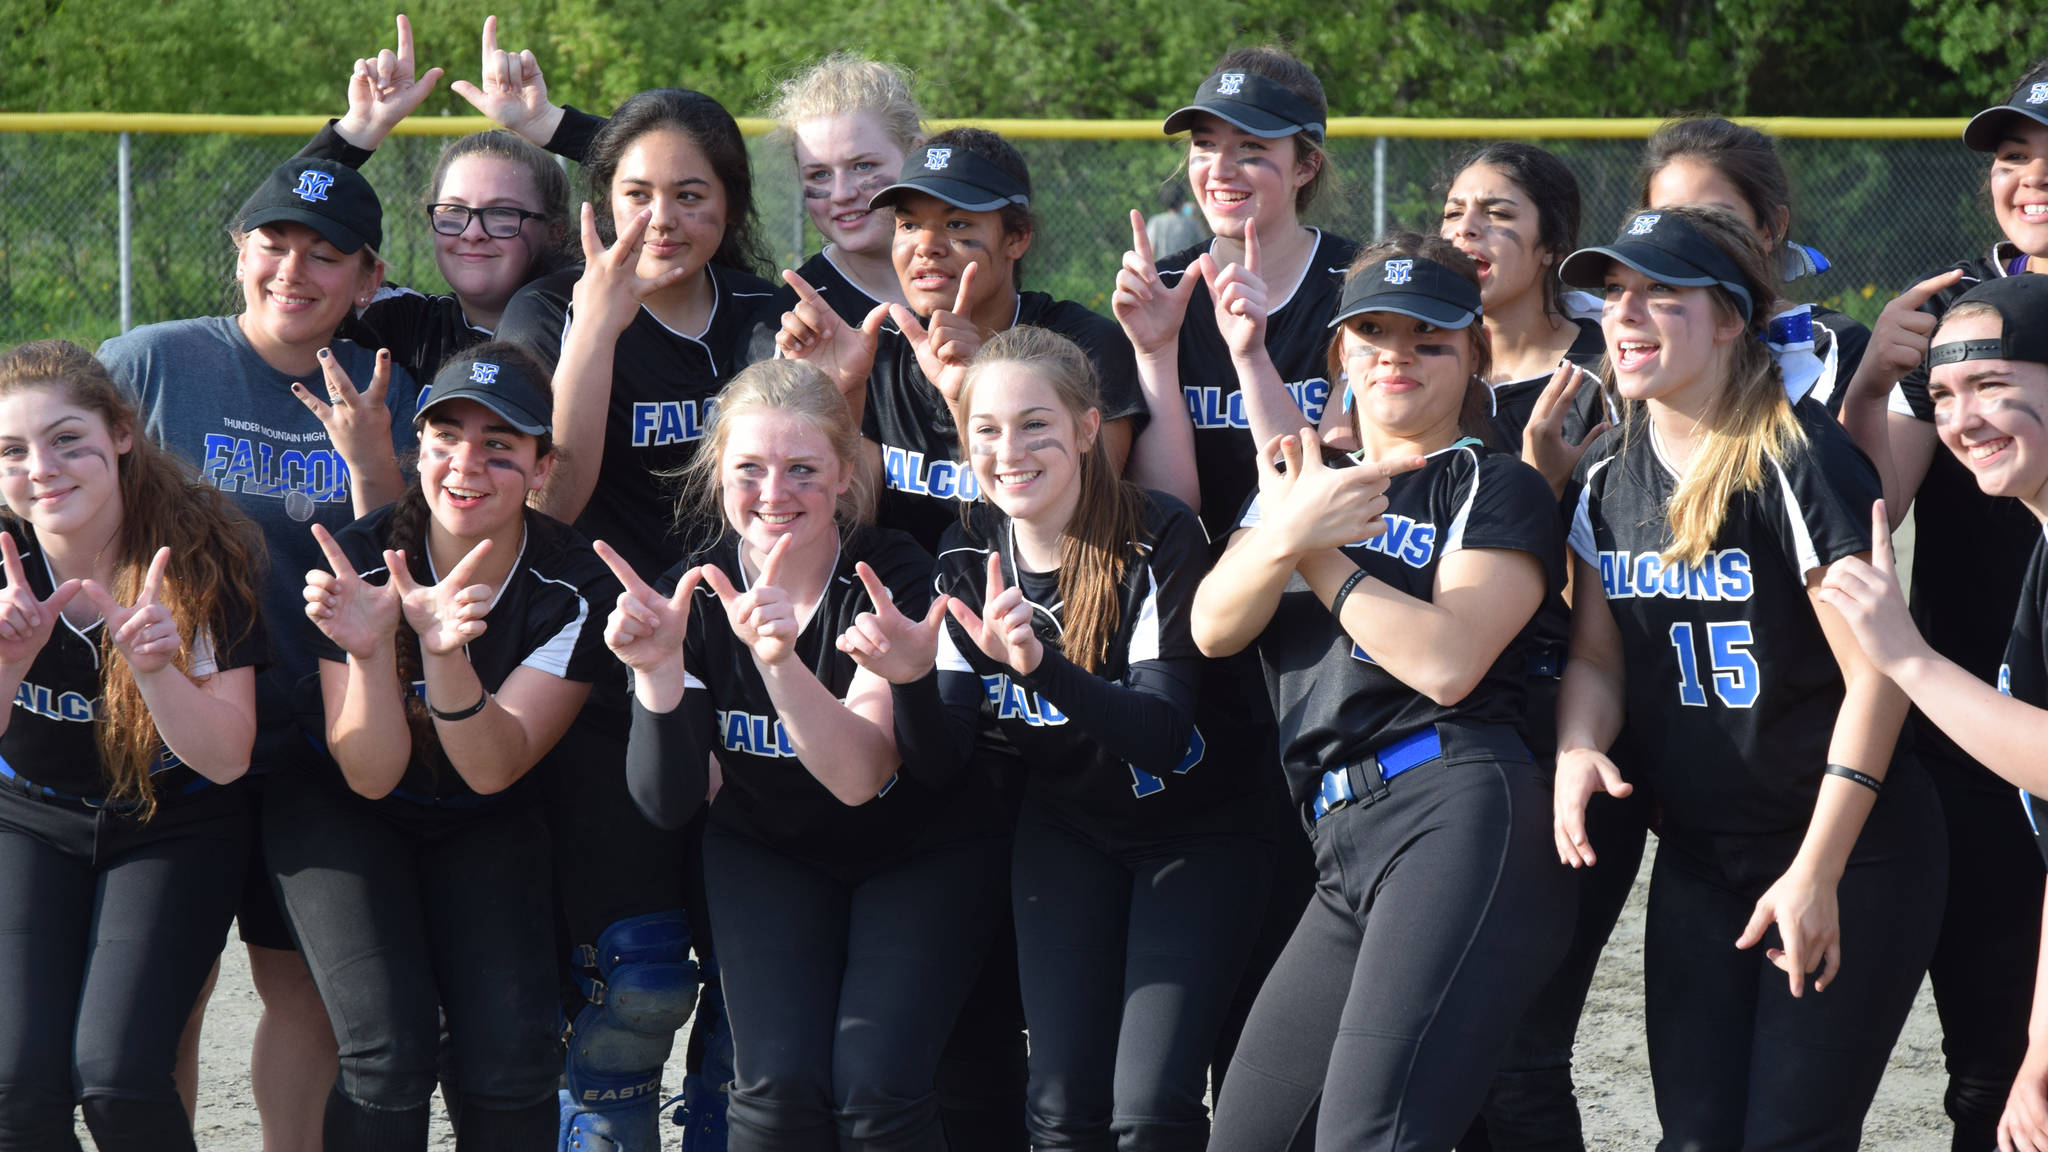 The Thunder Mountain High School softball team hams it up for the camera after winning the Region V softball championship with a 17-11 win over Juneau-Douglas High School, Saturday, May 27, 2017, at Melvin Park. (Nolin Ainsworth | Juneau Empire)